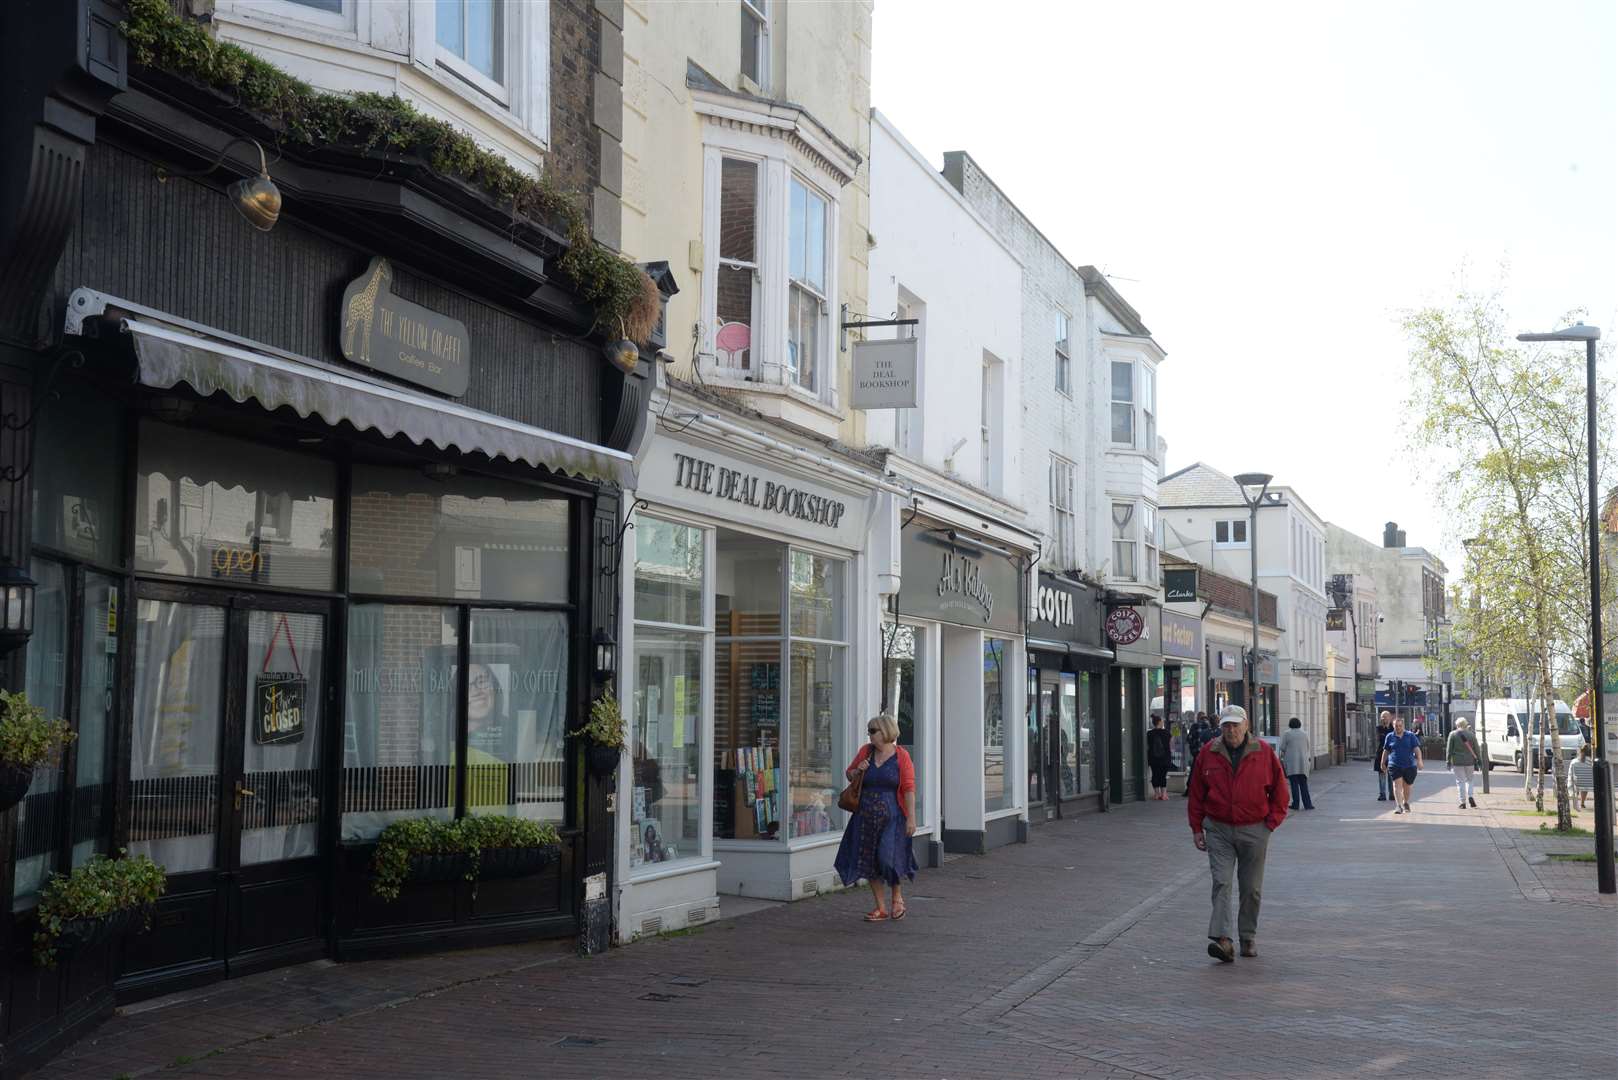 Deal was described as a thriving seaside town. Picture: Chris Davey